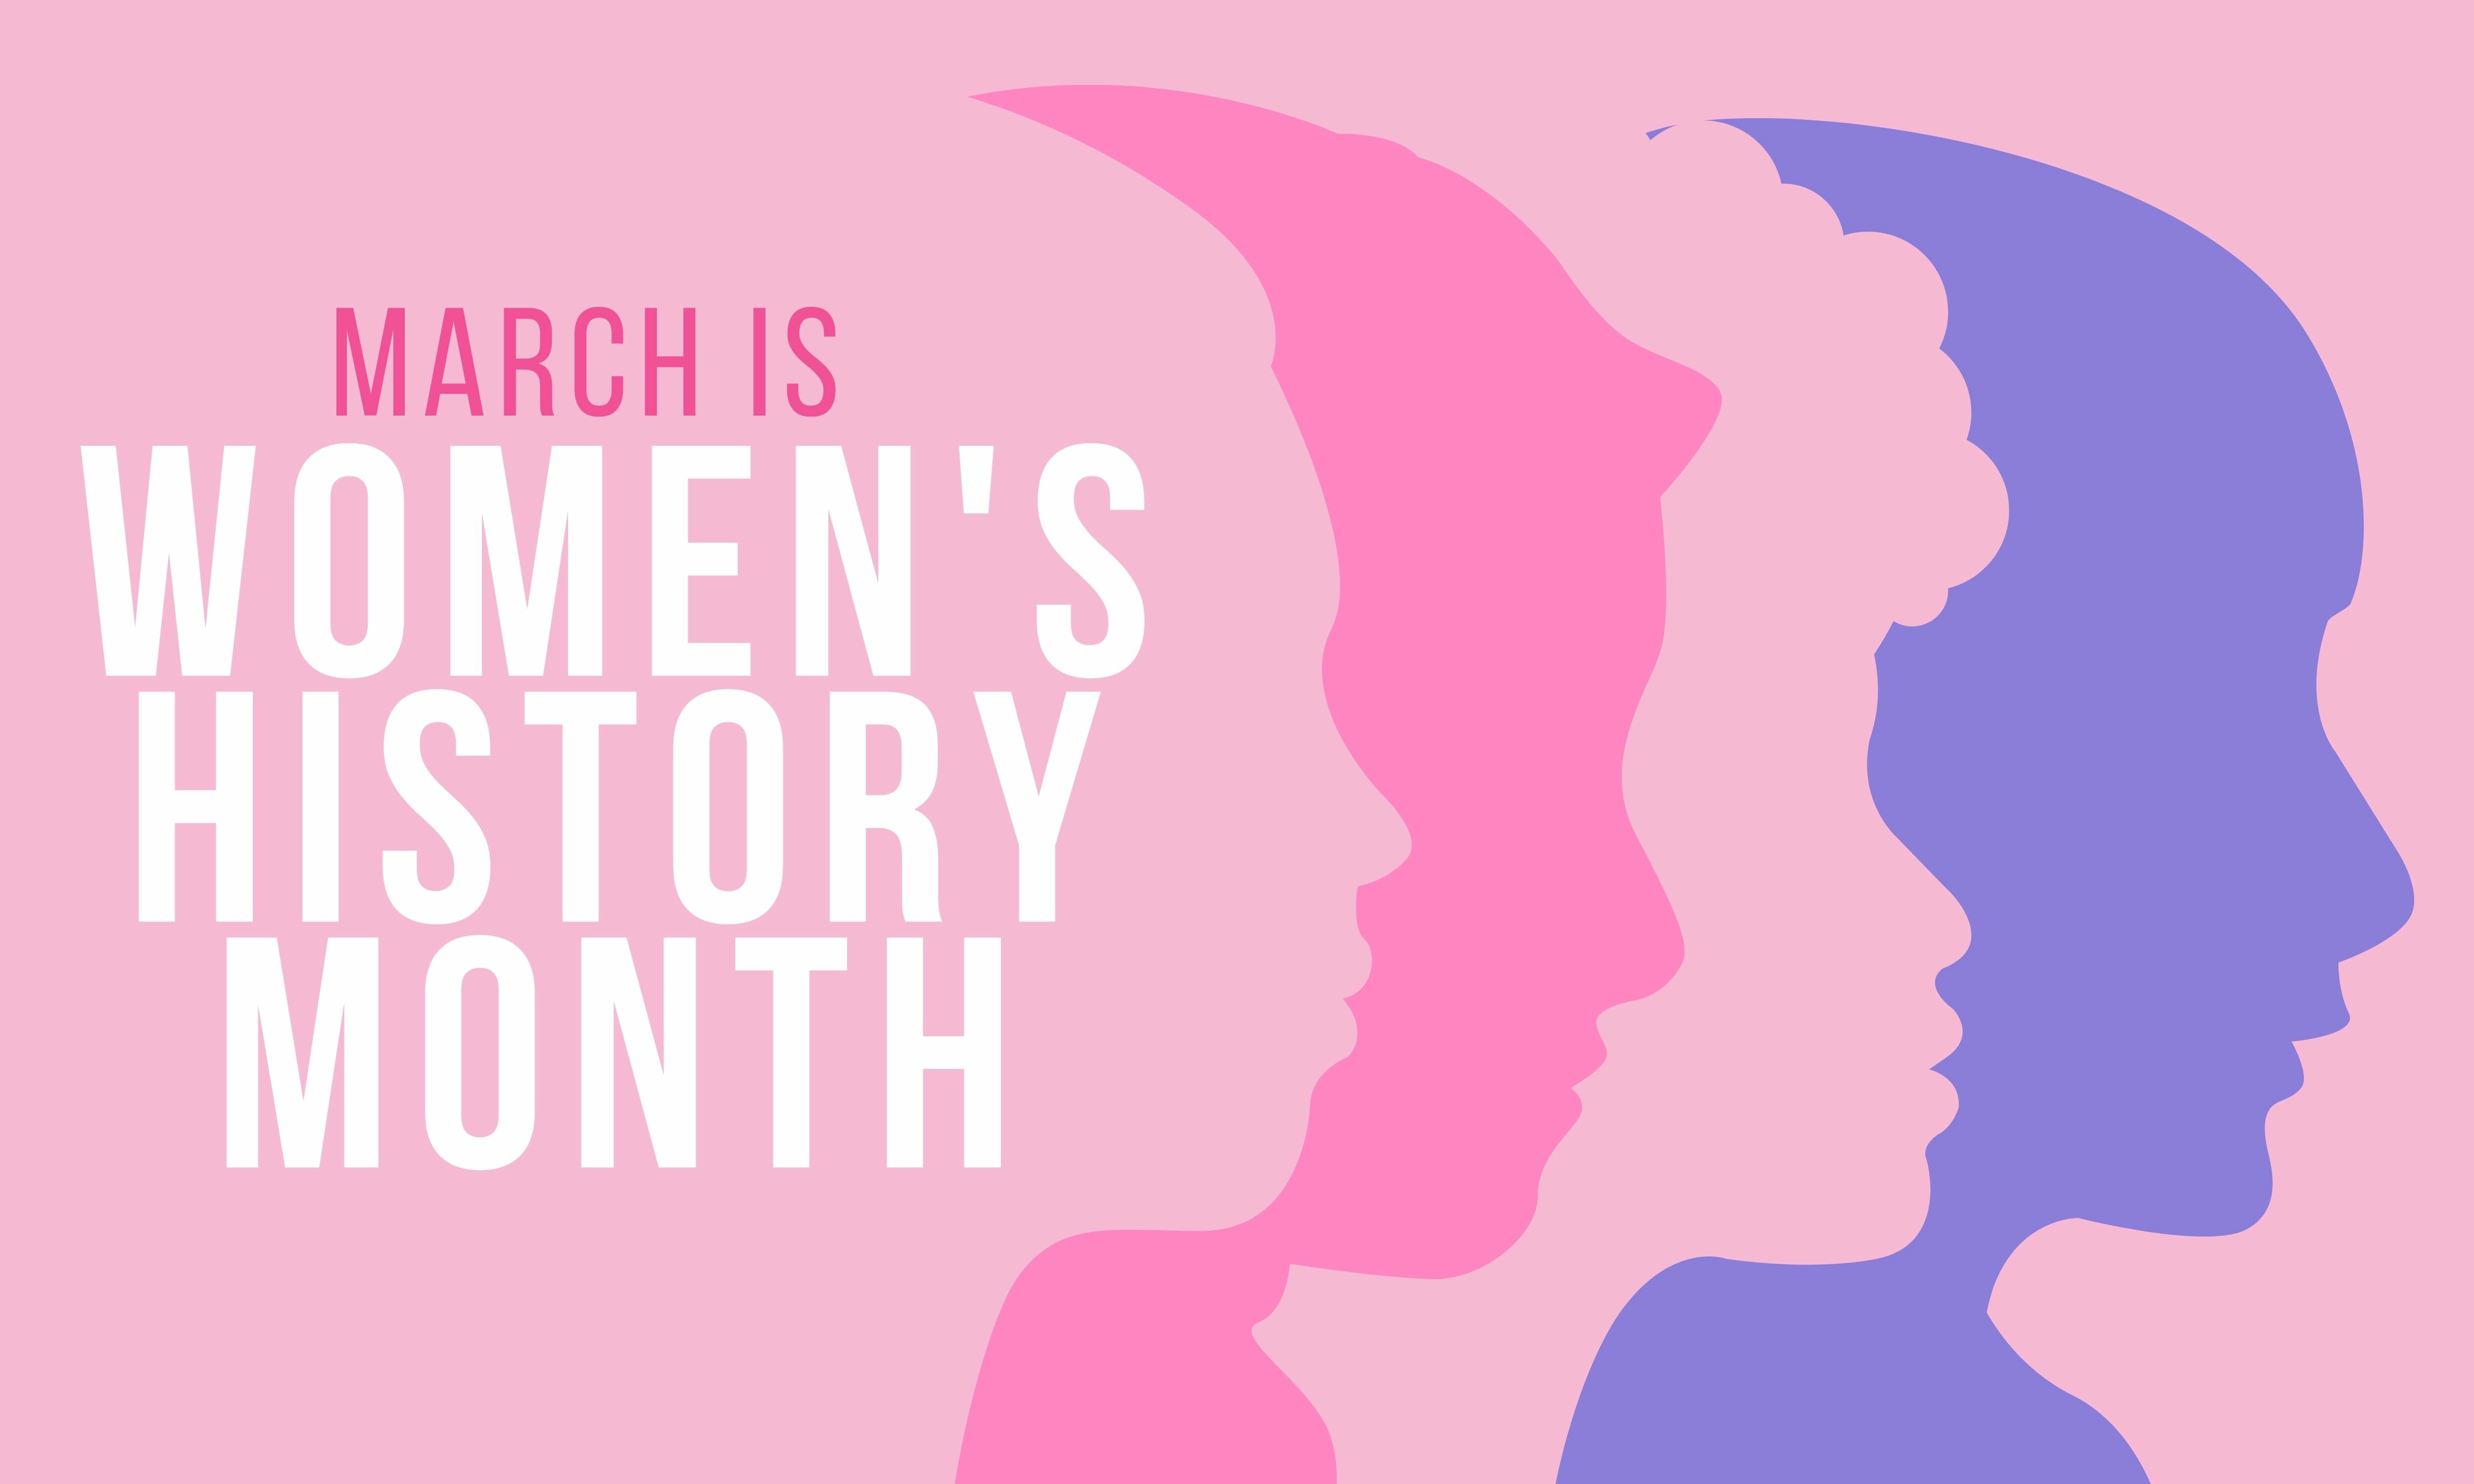 A decorative image saying "March is Women's History Month."